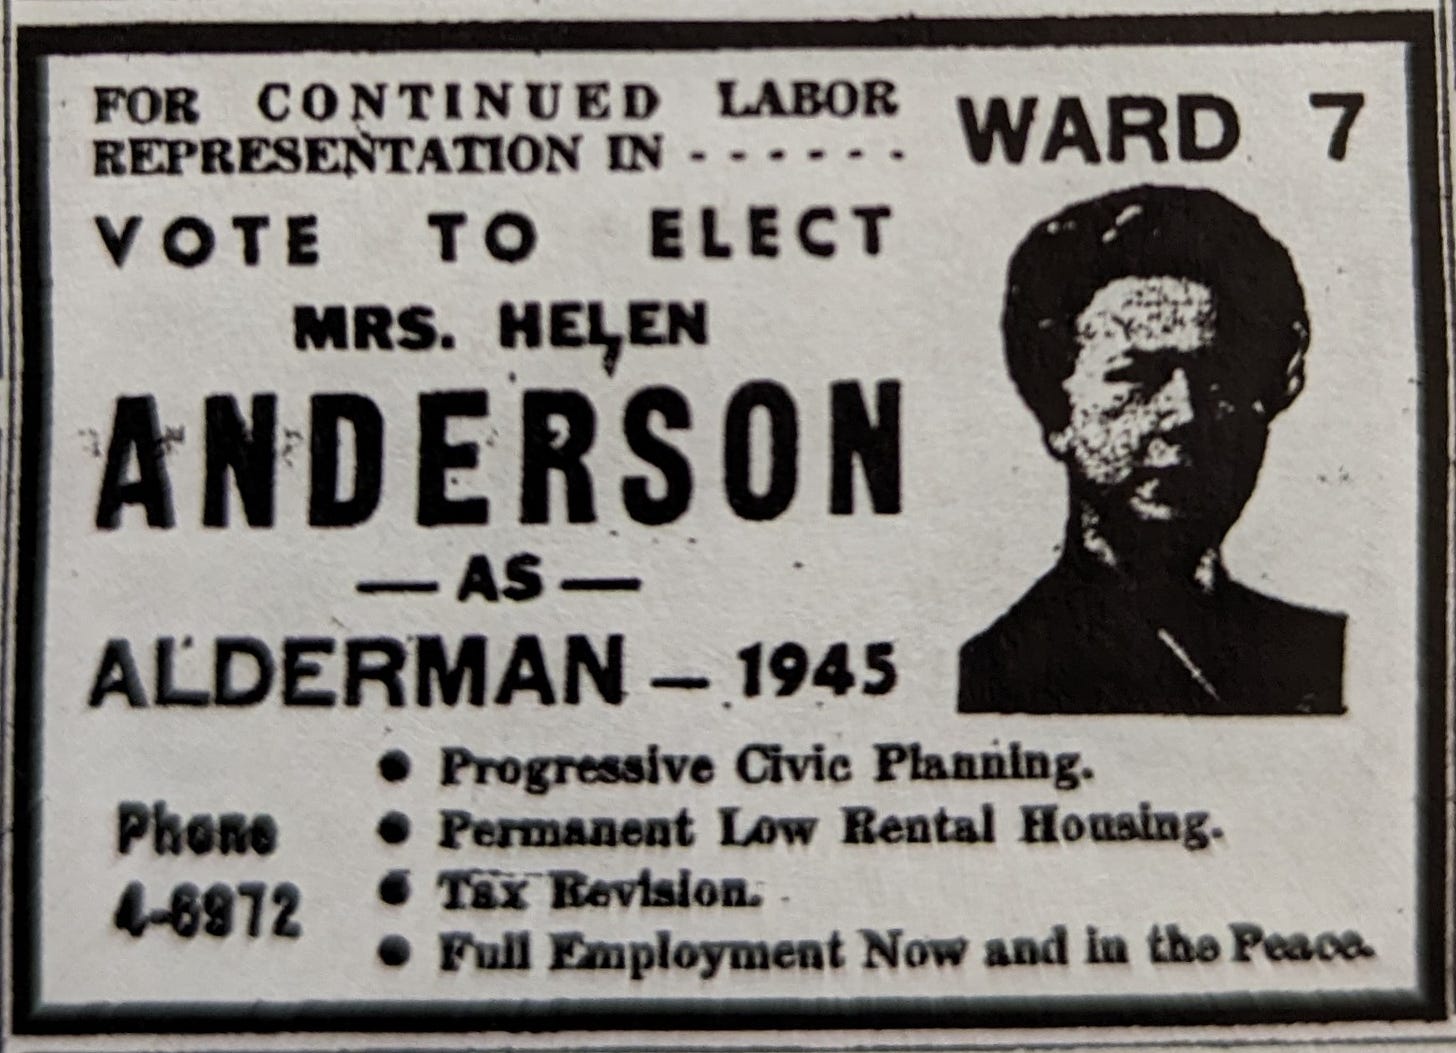 Campaign ad for Helen Anderson that reads "For continued Labour representation in Ward 7, vote to elect Mrs. Helen Anderson as Alderman in 1945. Progressive civic planning, permanent low rental housing, tax revision, full employment now and in the peace."